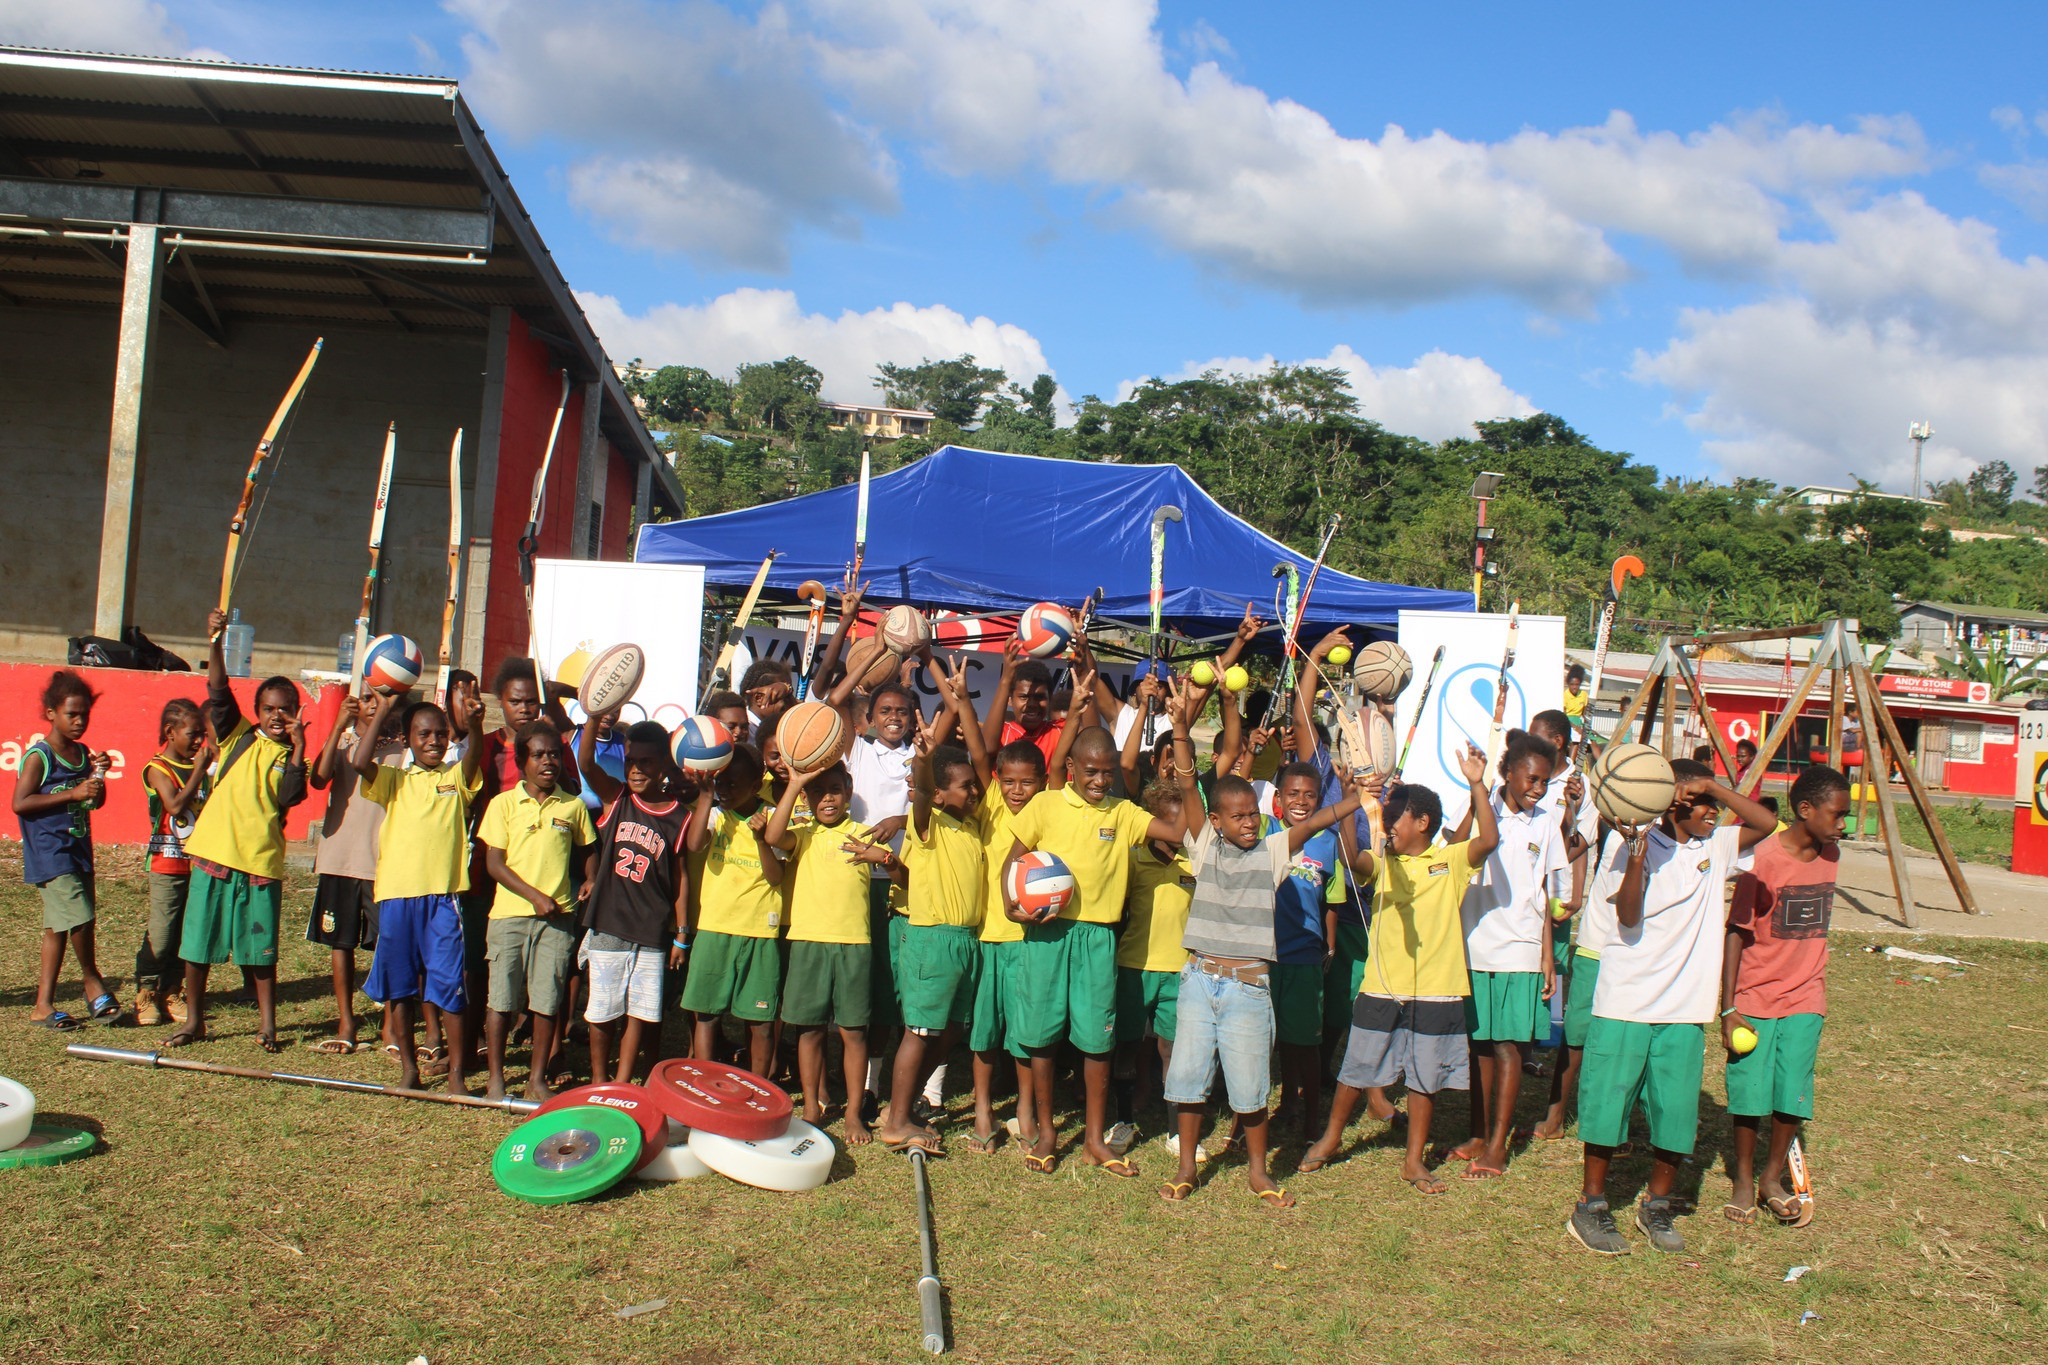 More than 350 people attend community sports awareness events in Vanuatu